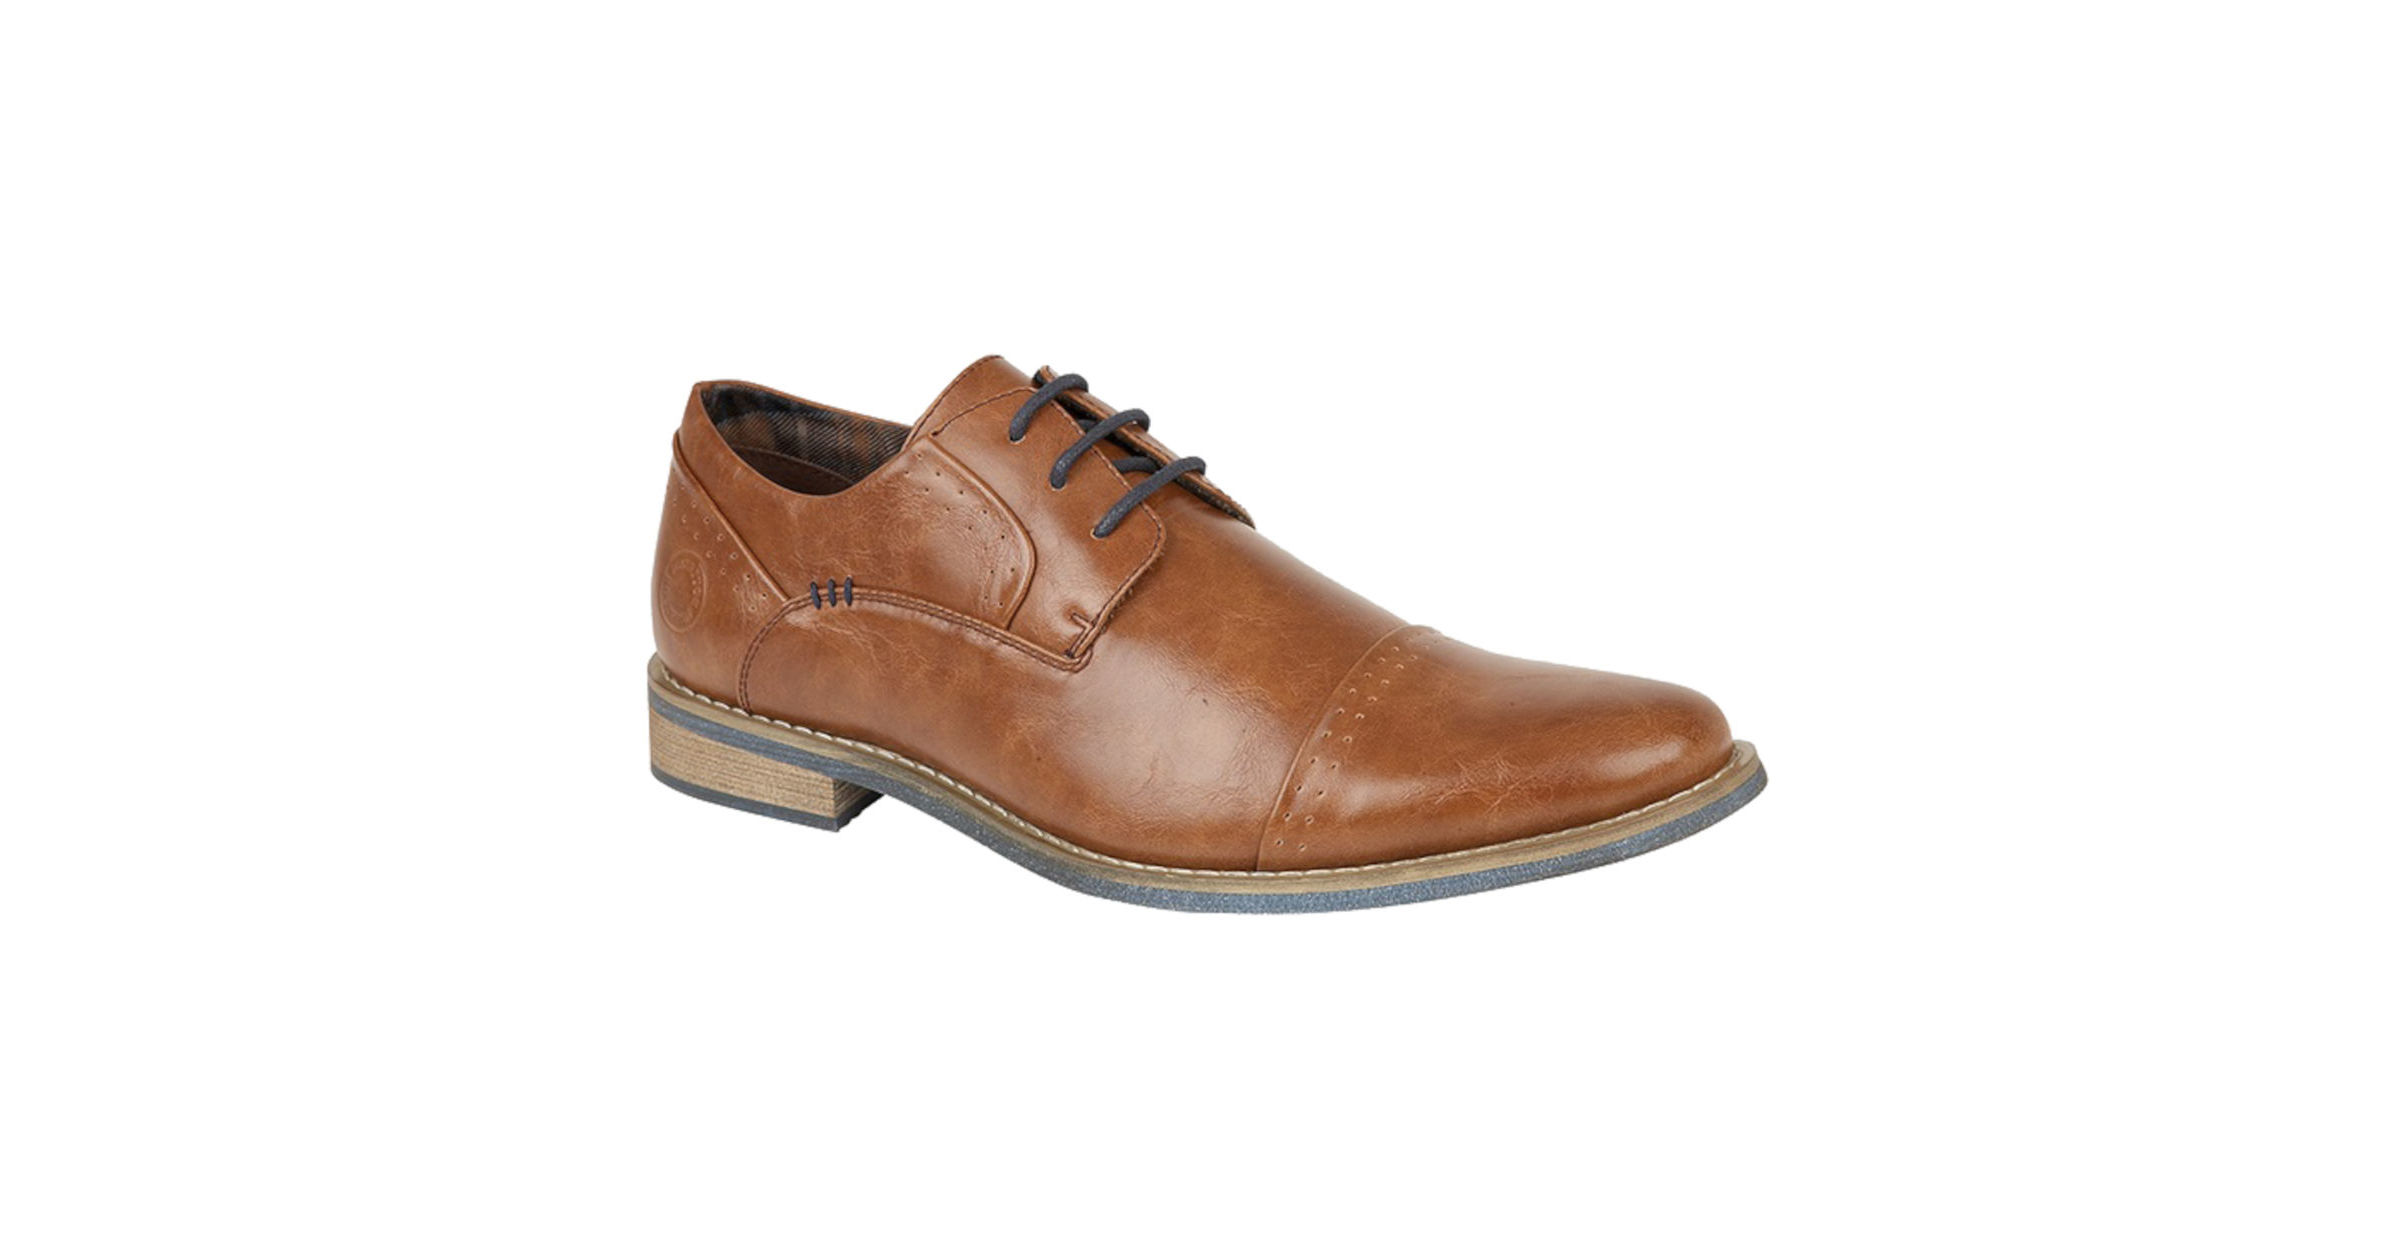 Mens Lace Up Leather Formal Shoes with Contrasting Laces and Soles (Color: Brandy, Size: UK 12) by Absolute Footwear